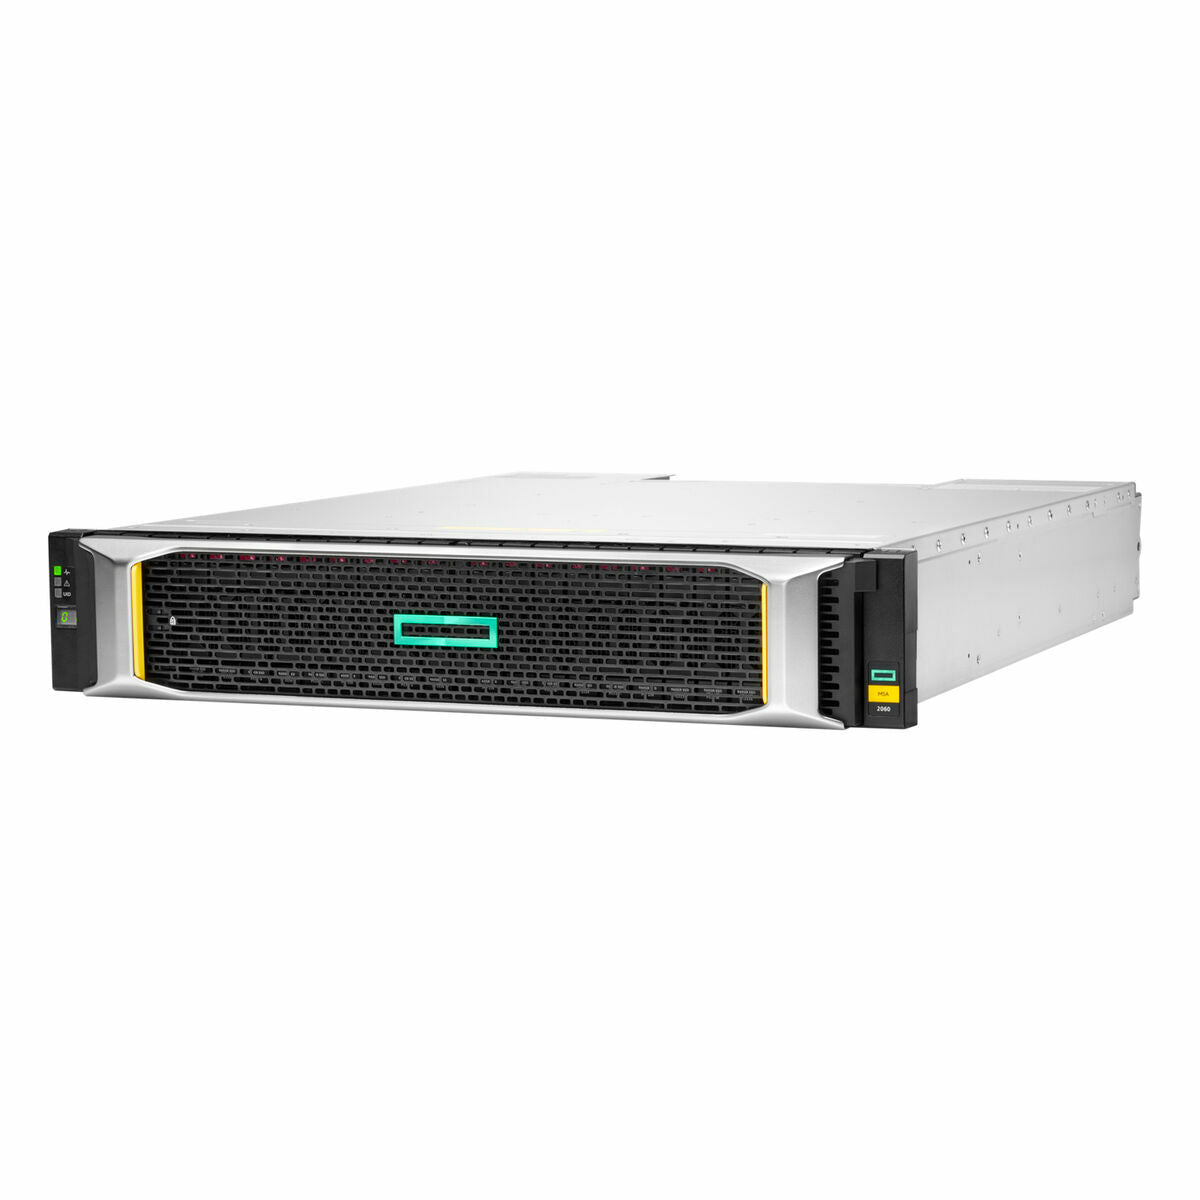 Network Storage HPE R0Q82B 1,92 TB SSD, HPE, Computing, network-storage-hpe-r0q82b-1-92-tb-ssd, :2 TB, Brand_HPE, category-reference-2609, category-reference-2791, category-reference-2799, category-reference-t-19685, category-reference-t-19905, computers / components, Condition_NEW, office, Price_+ 1000, Teleworking, RiotNook